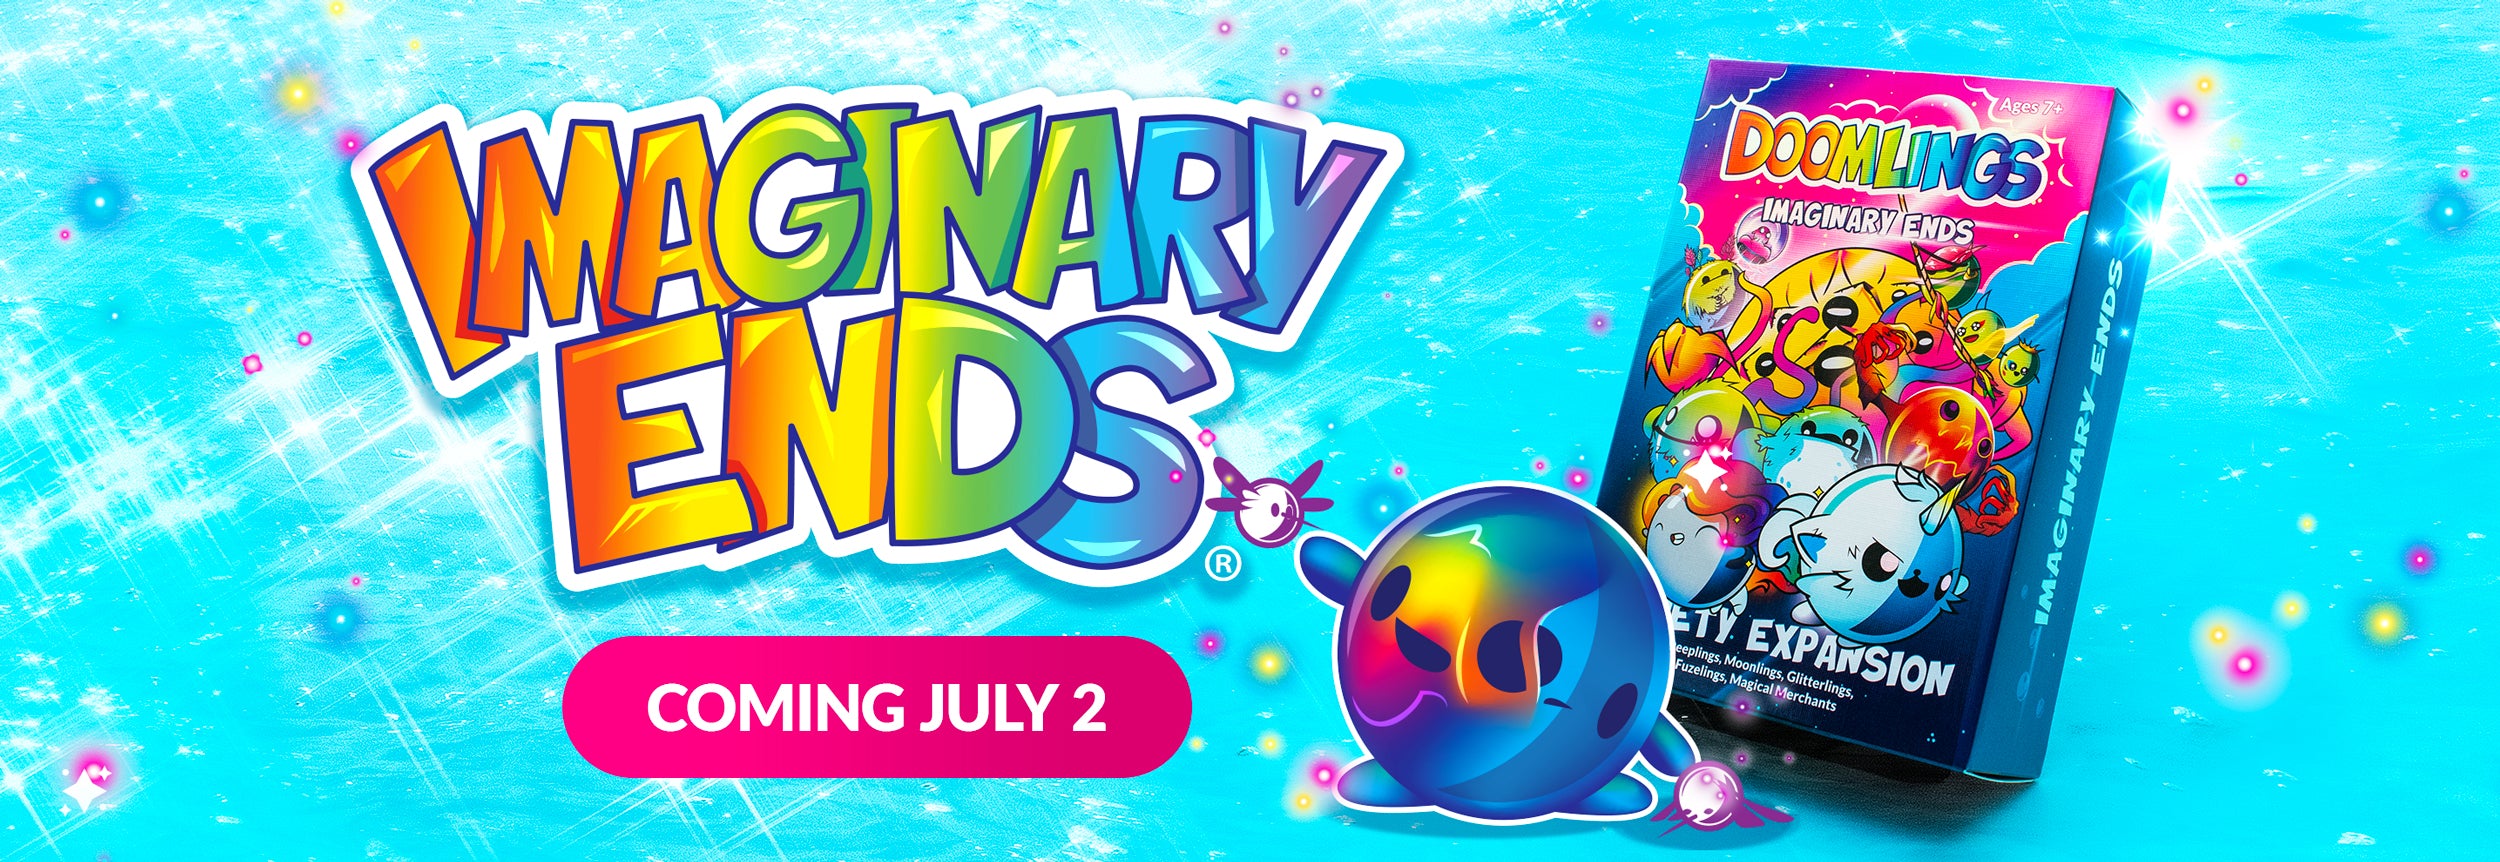 Imaginary Ends Button COMING JULY 2. Doomlings Imaginary Ends box and rainbow Doomling with sparkles around it.